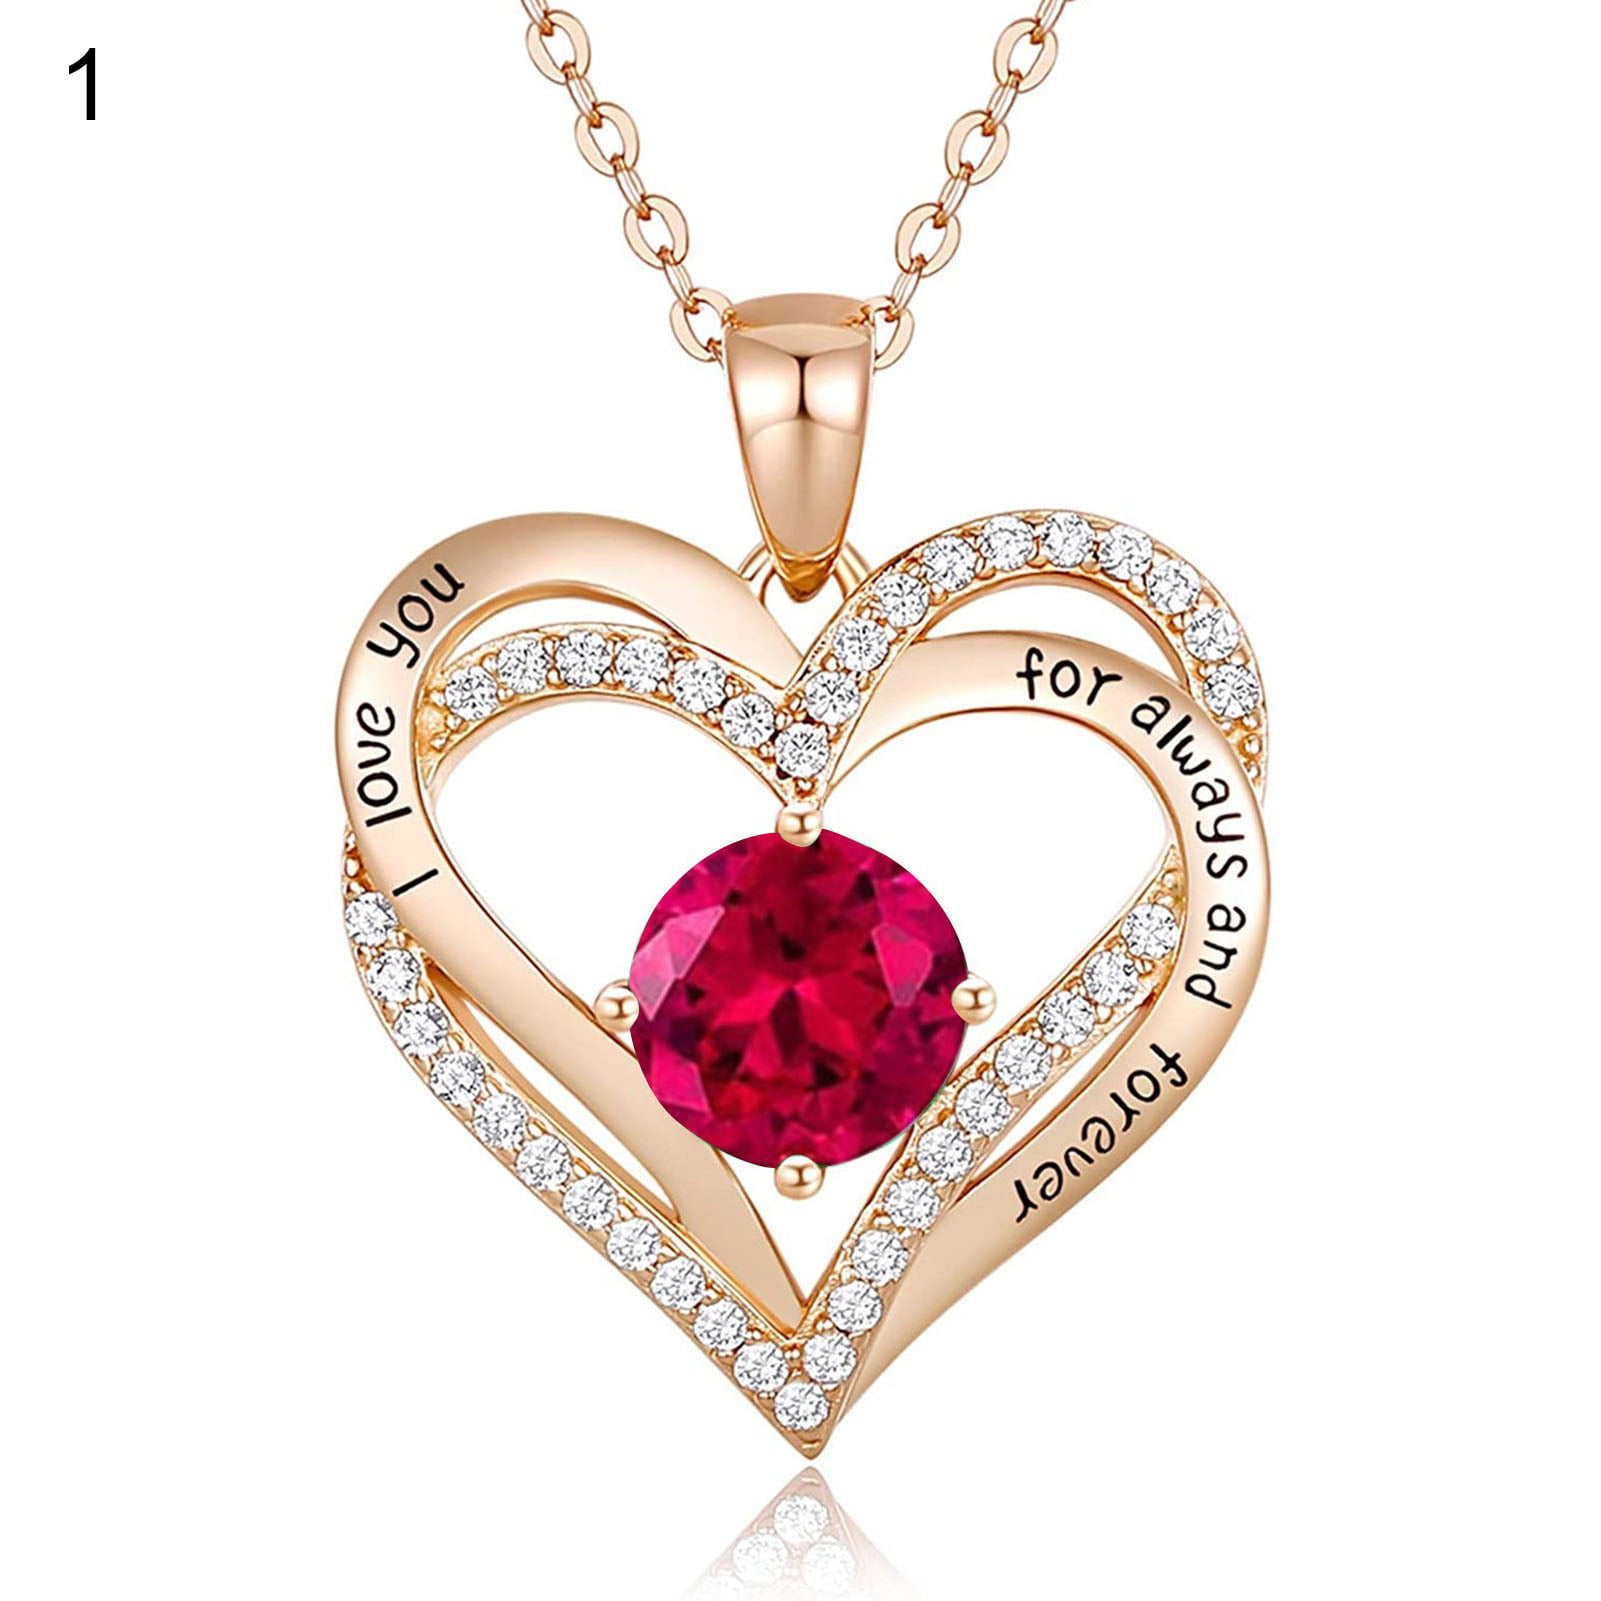 £0.99 925 Sterling Silver Heart Love Necklace Christmas Birthday Party Present 